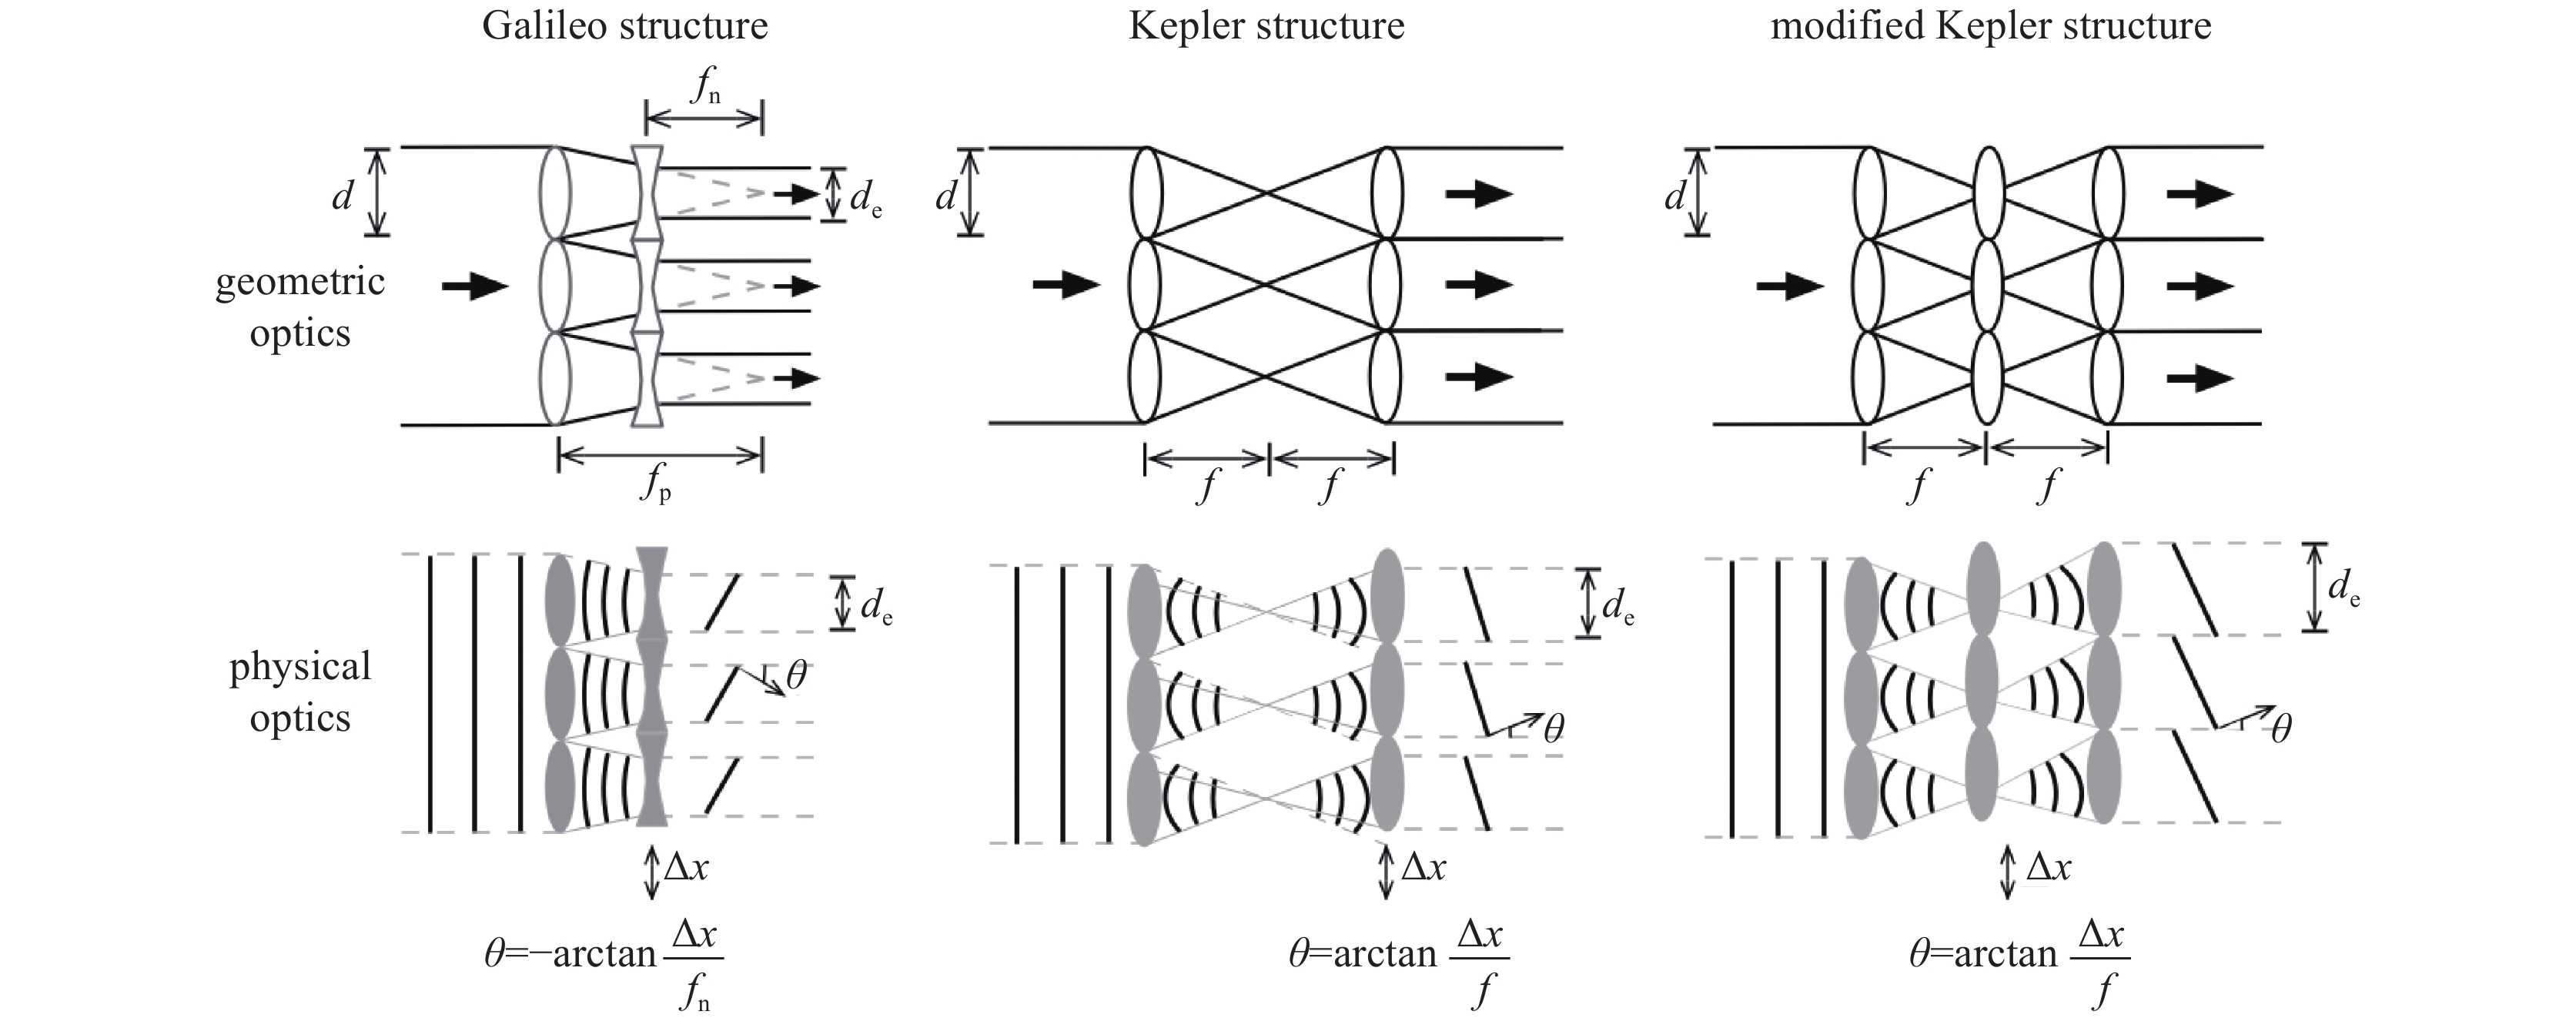 Schematic diagram of microlens array optical phased array with different structure